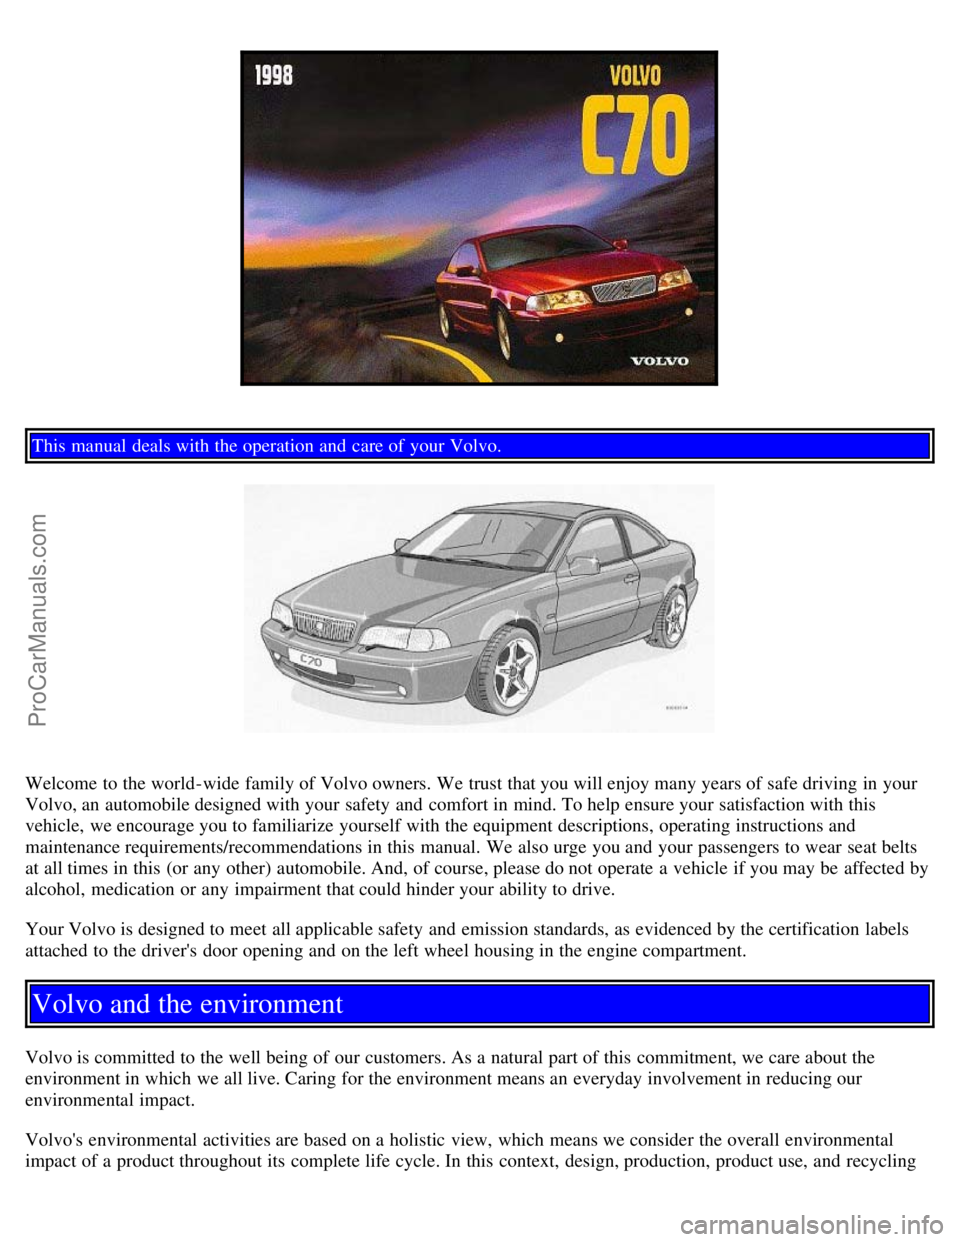 VOLVO C70 1998  Owners Manual This manual  deals with the operation and  care of your Volvo.
Welcome to the world-wide  family of Volvo owners. We trust that you will enjoy many years of safe driving in your
Volvo, an  automobile 